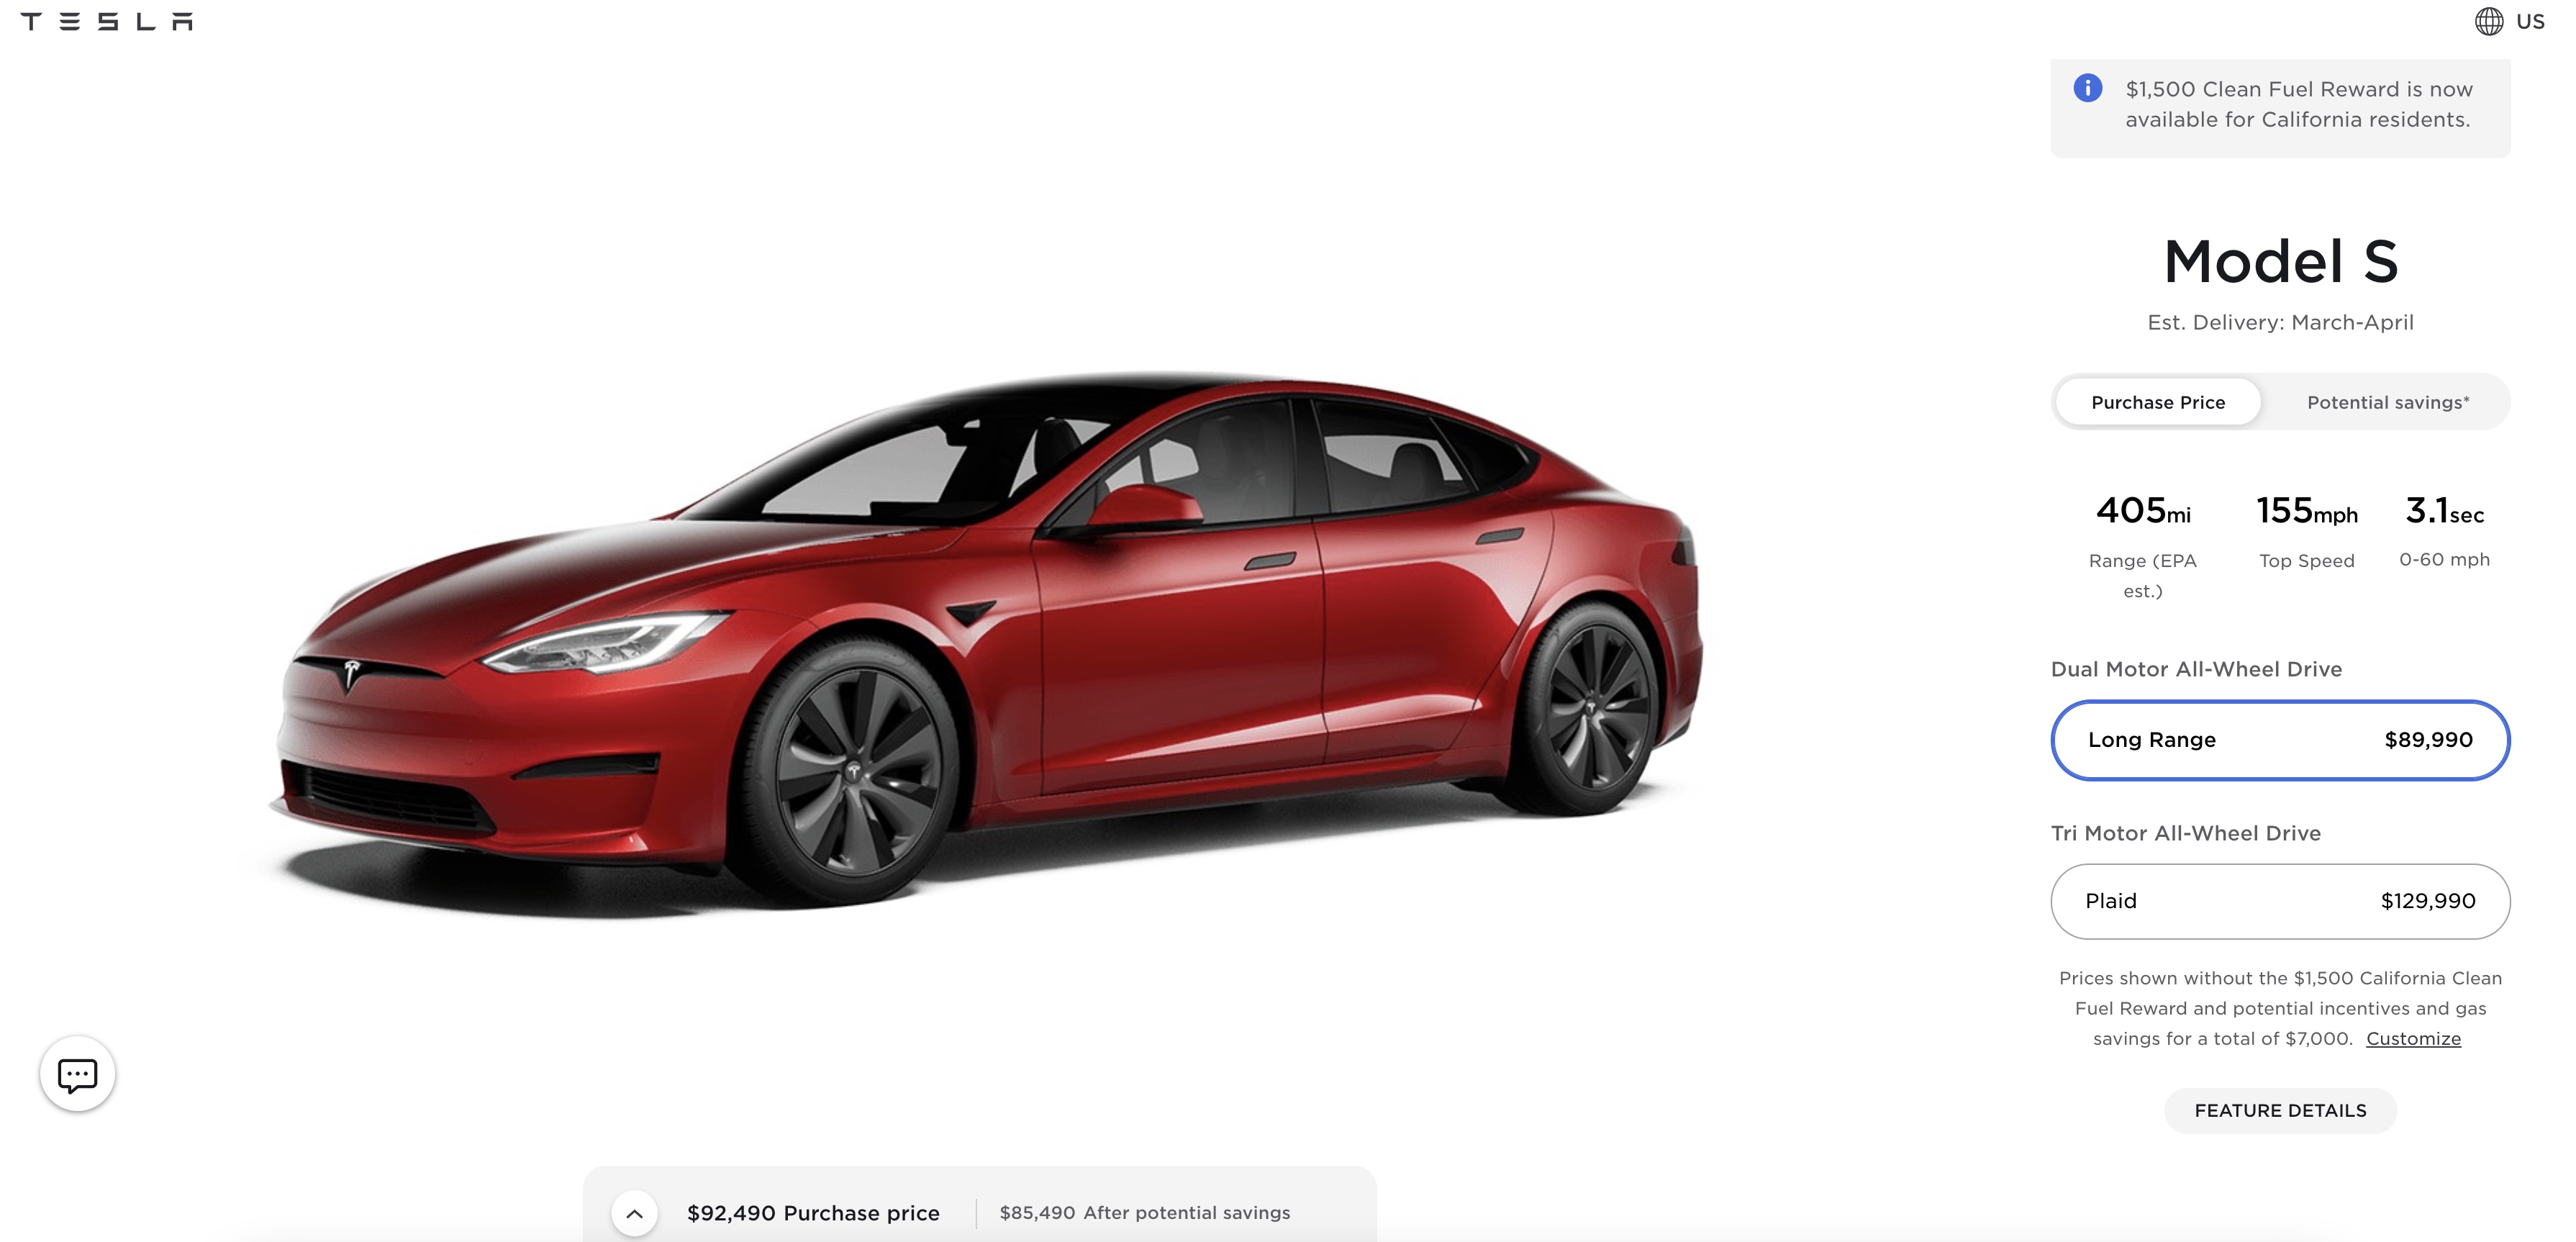 Tesla Increases Model S Price By Another 5000 - Electrek